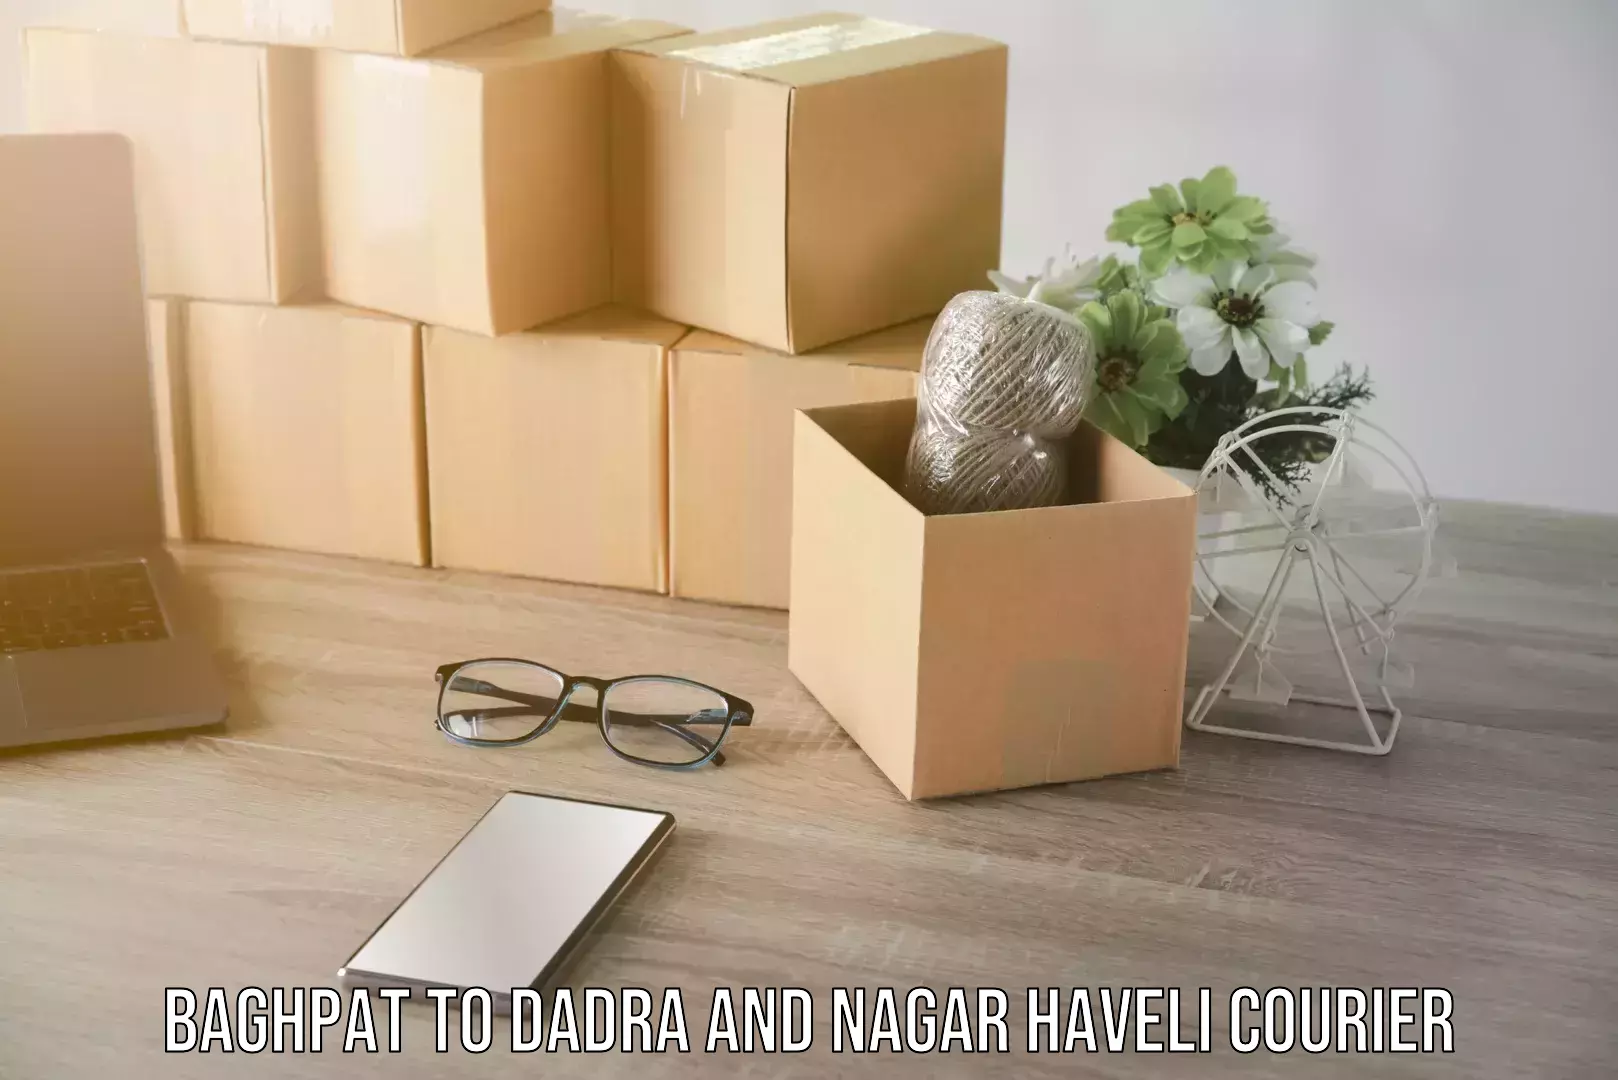 Speedy delivery service Baghpat to Dadra and Nagar Haveli